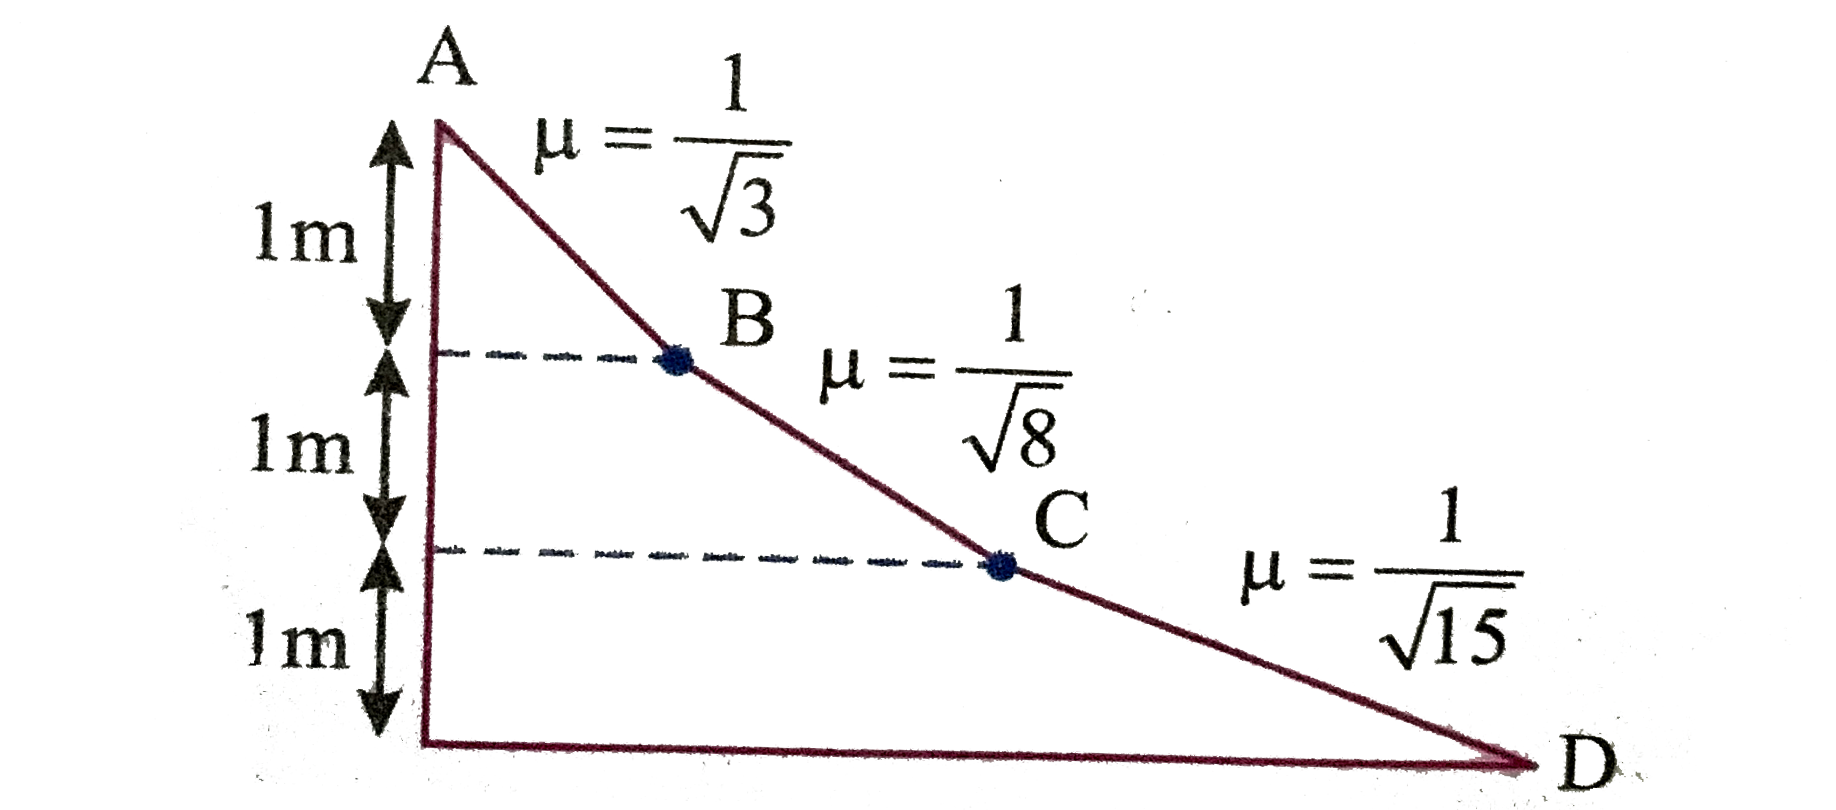 A composite inclined plane has three different inclined surfaces AB, BC and CD of heights 1 m each and coefficients of friction (1)/(sqrt(3)), (1)/(sqrt(8)) and (1)/(sqrt(15)) respectively. A particle given an initial velocity at A along AB transverses the inclined surfaces with uniform speed, reaches D in 5s. The initial speed given is (